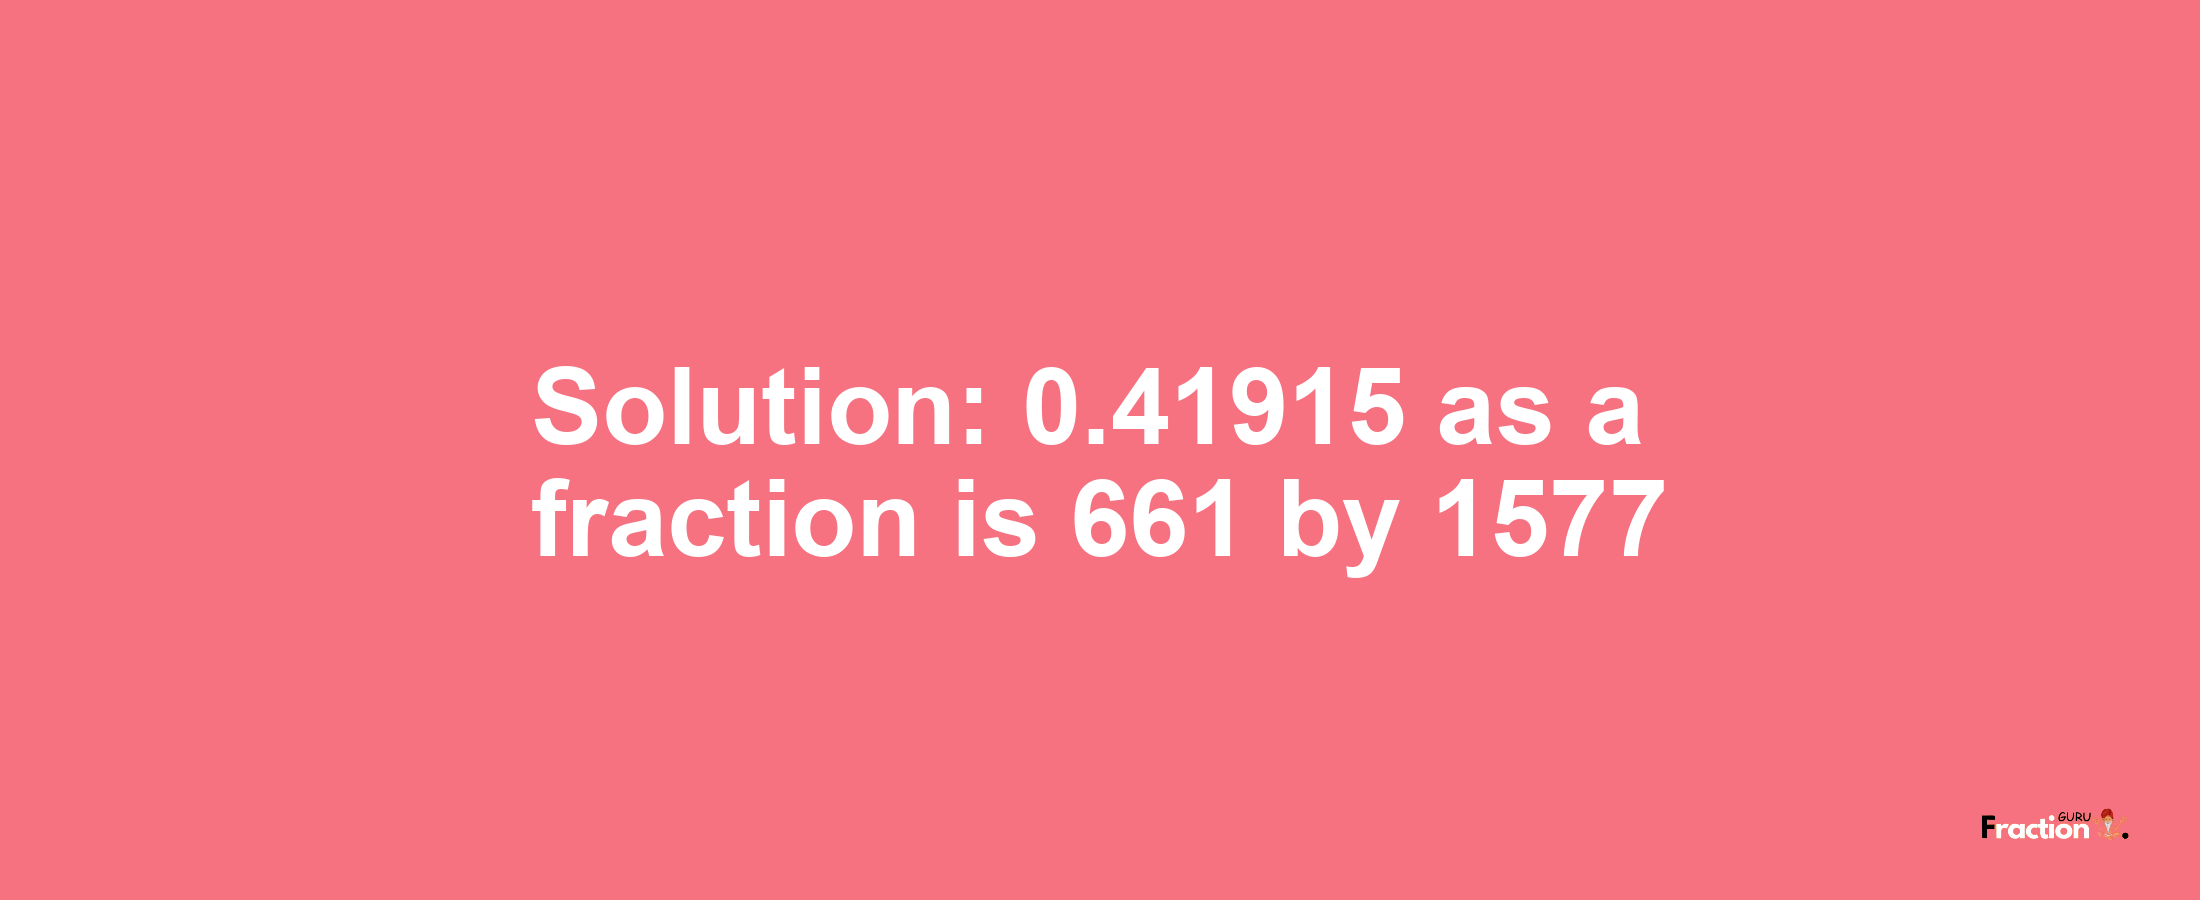 Solution:0.41915 as a fraction is 661/1577